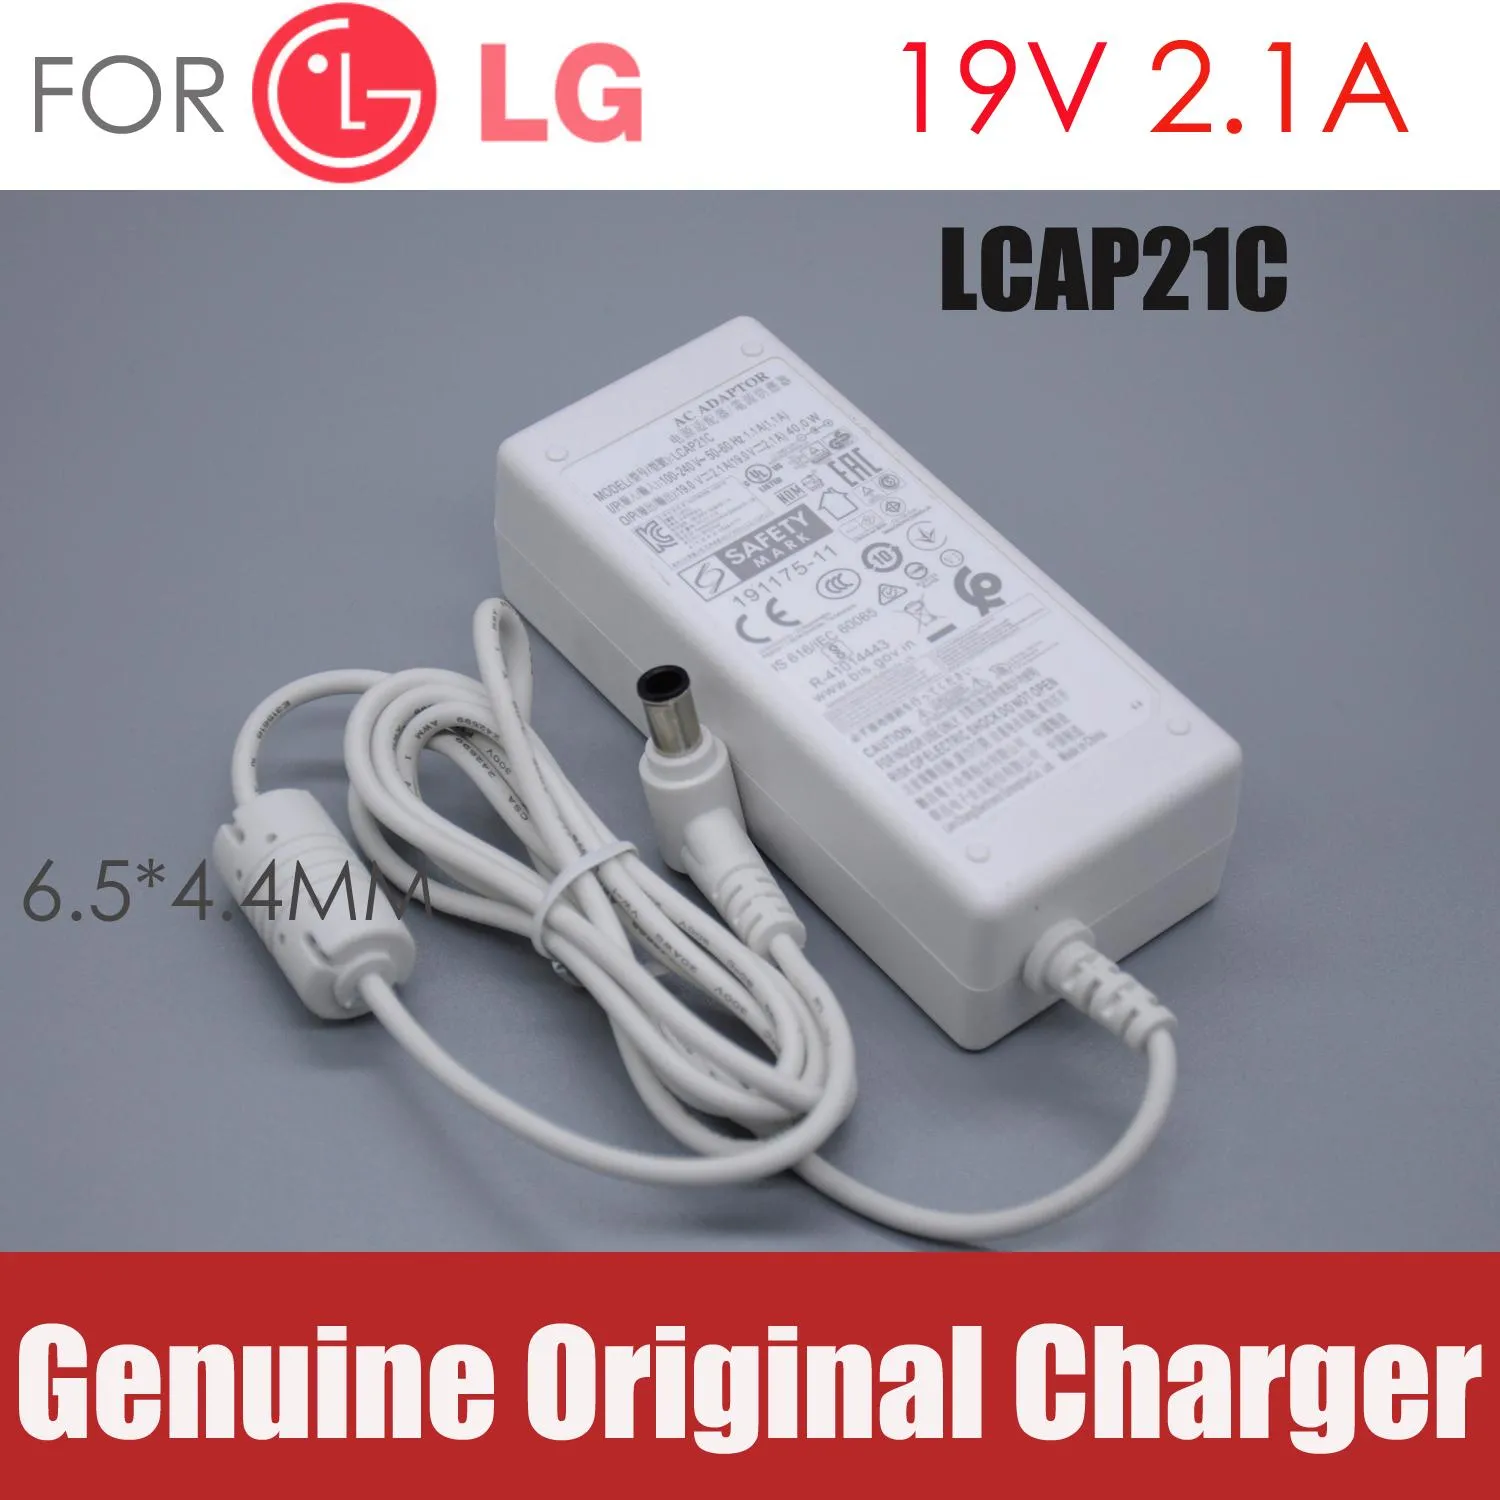 Chargers new Original FOR LG LCD monitor LED TV 19V2.1A LCAP21C AC adapter Power supply Charger cord